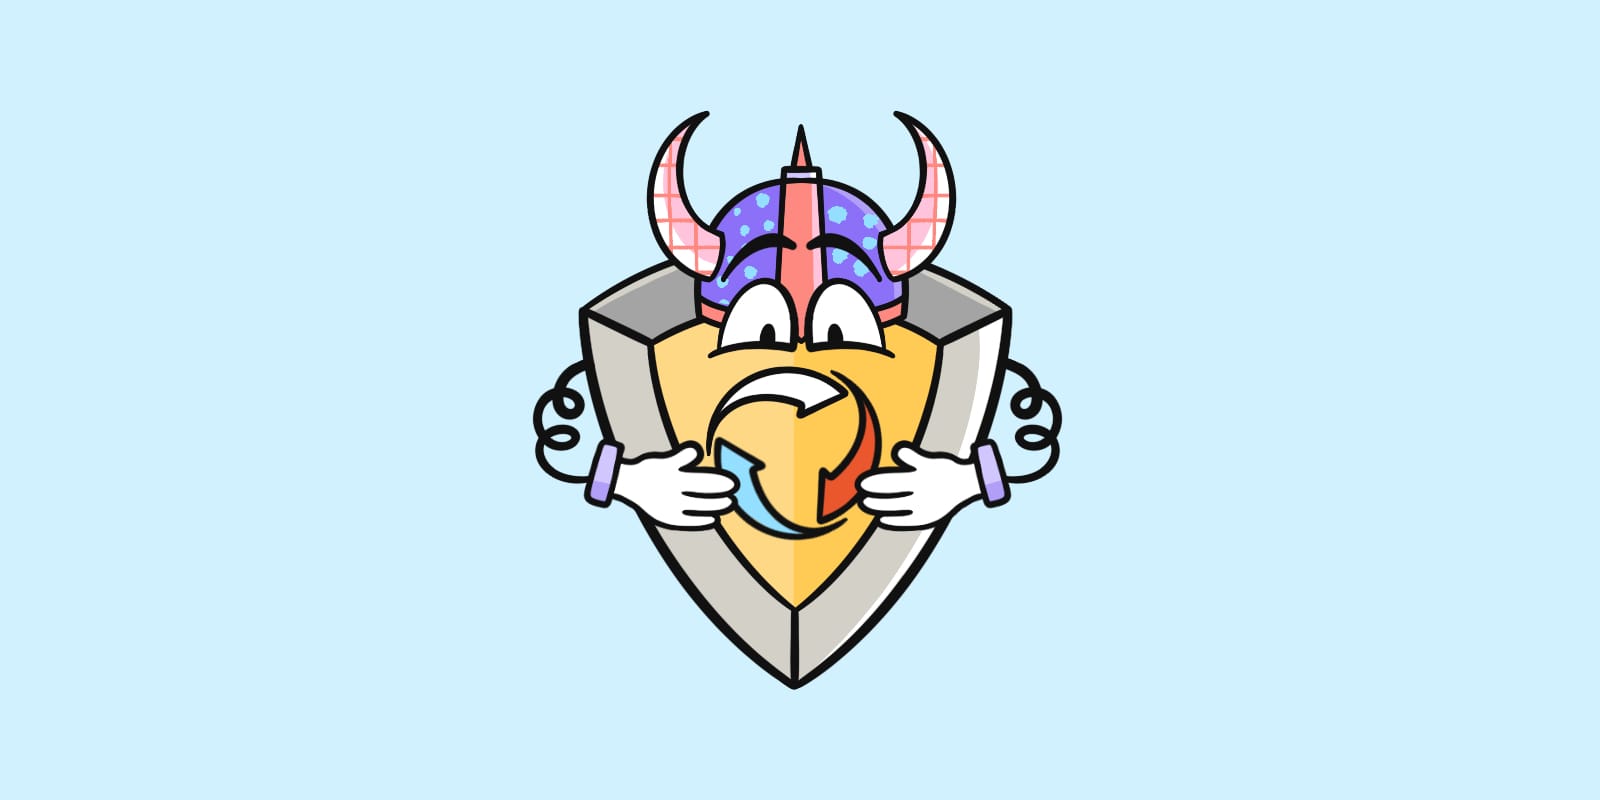 An illustration of a shield with eyes and hands wearing a viking helmet over a blue background